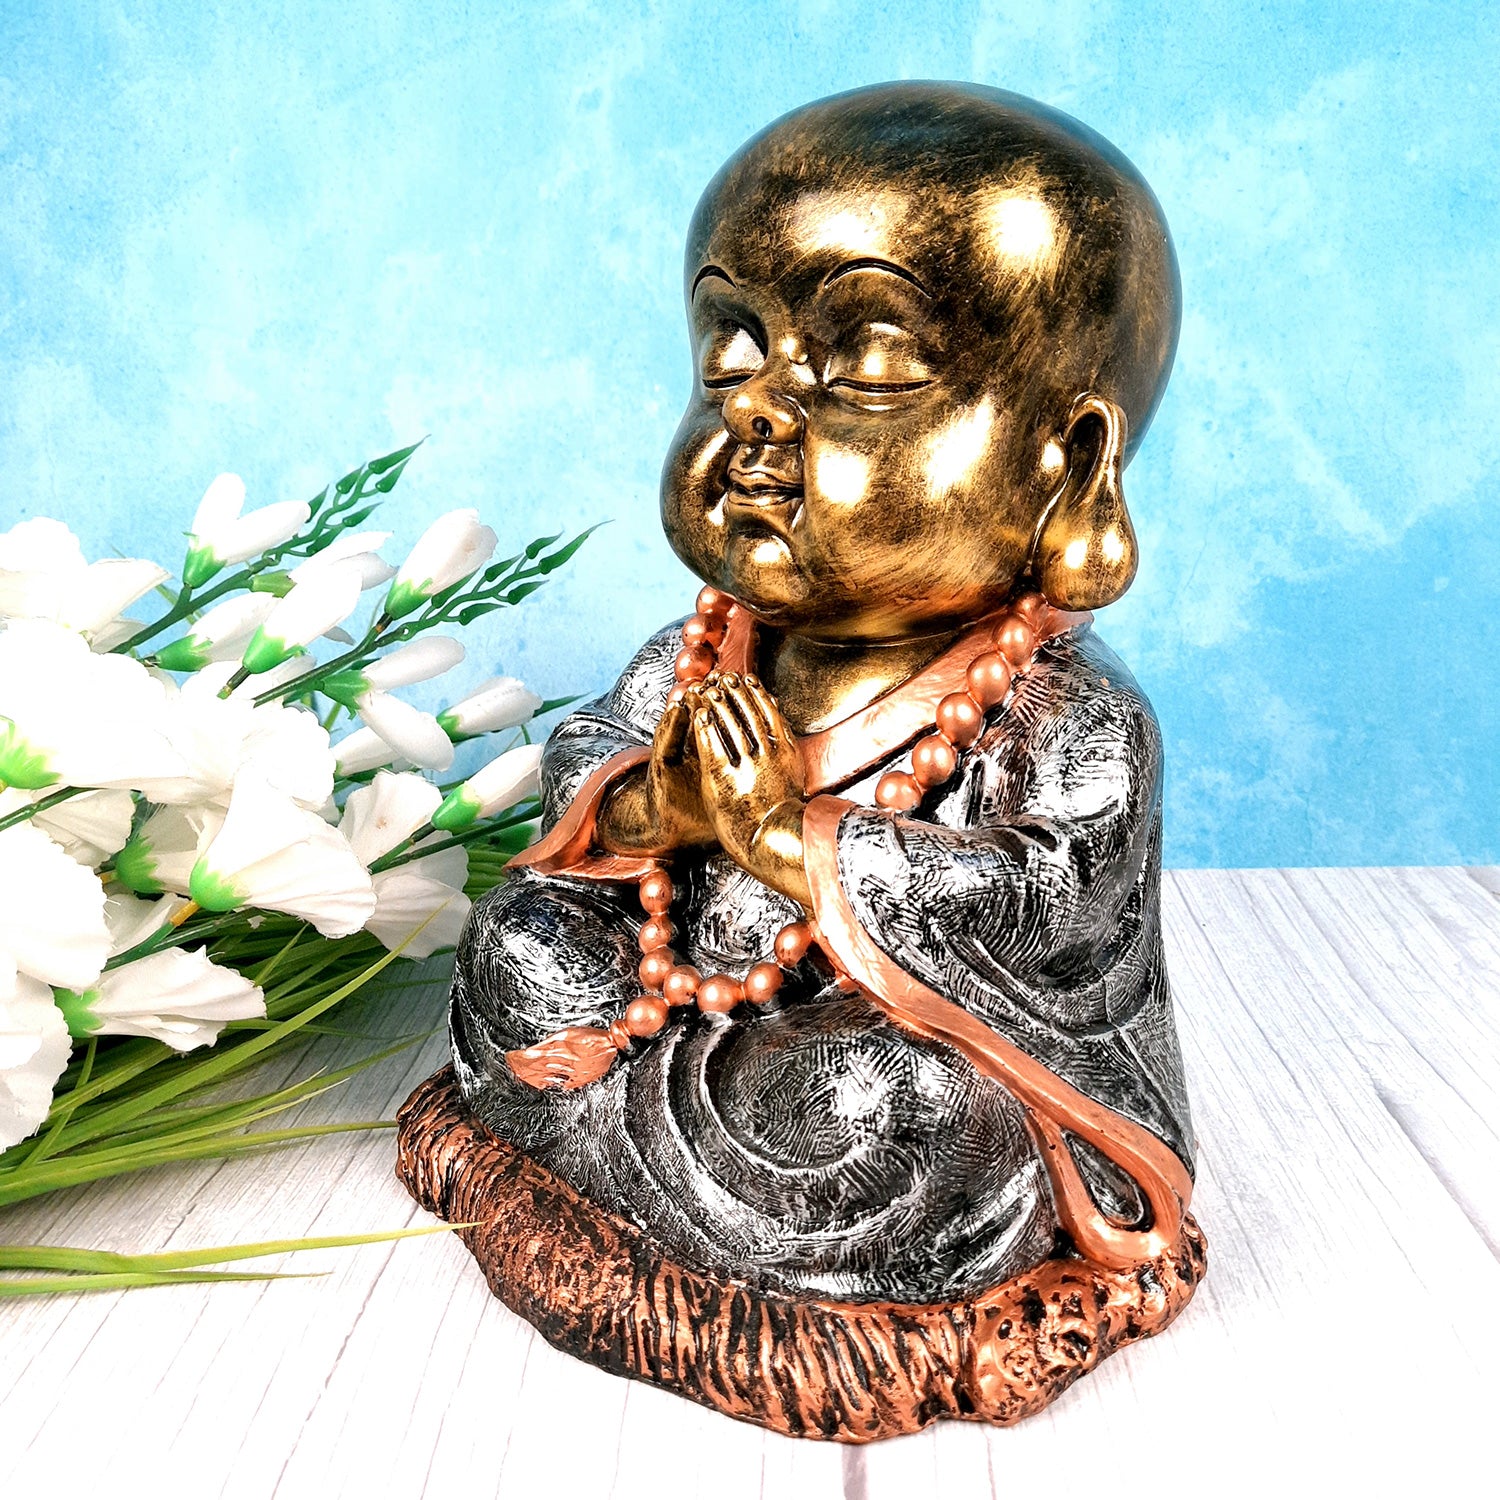 Baby Monk Showpiece with Rustic Look | Feng Shui Decor - For Good Luck, Home, Table, Office Decor & Gift -10 Inch - apkamart